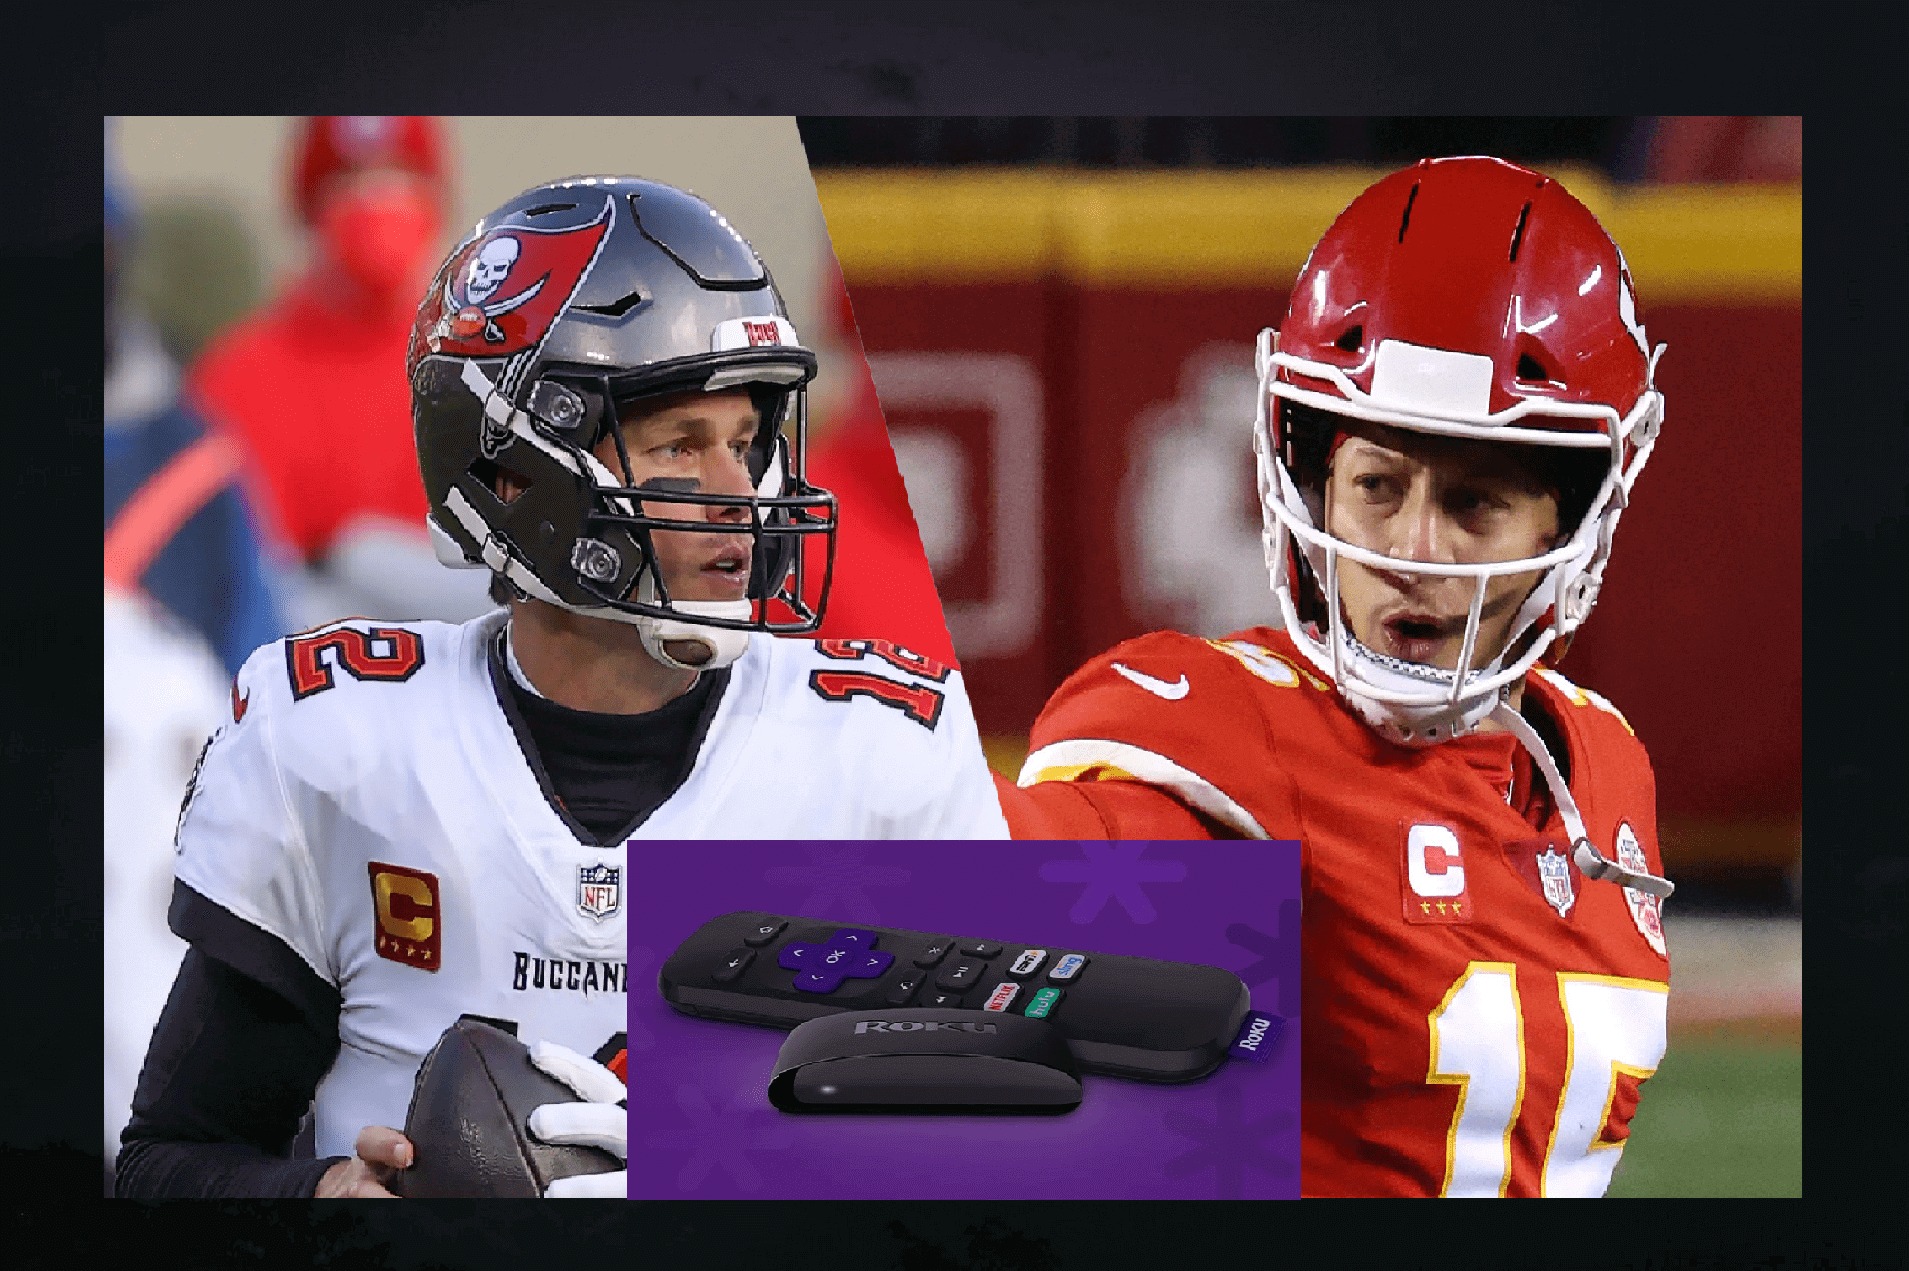 How To Watch Superbowl On Roku